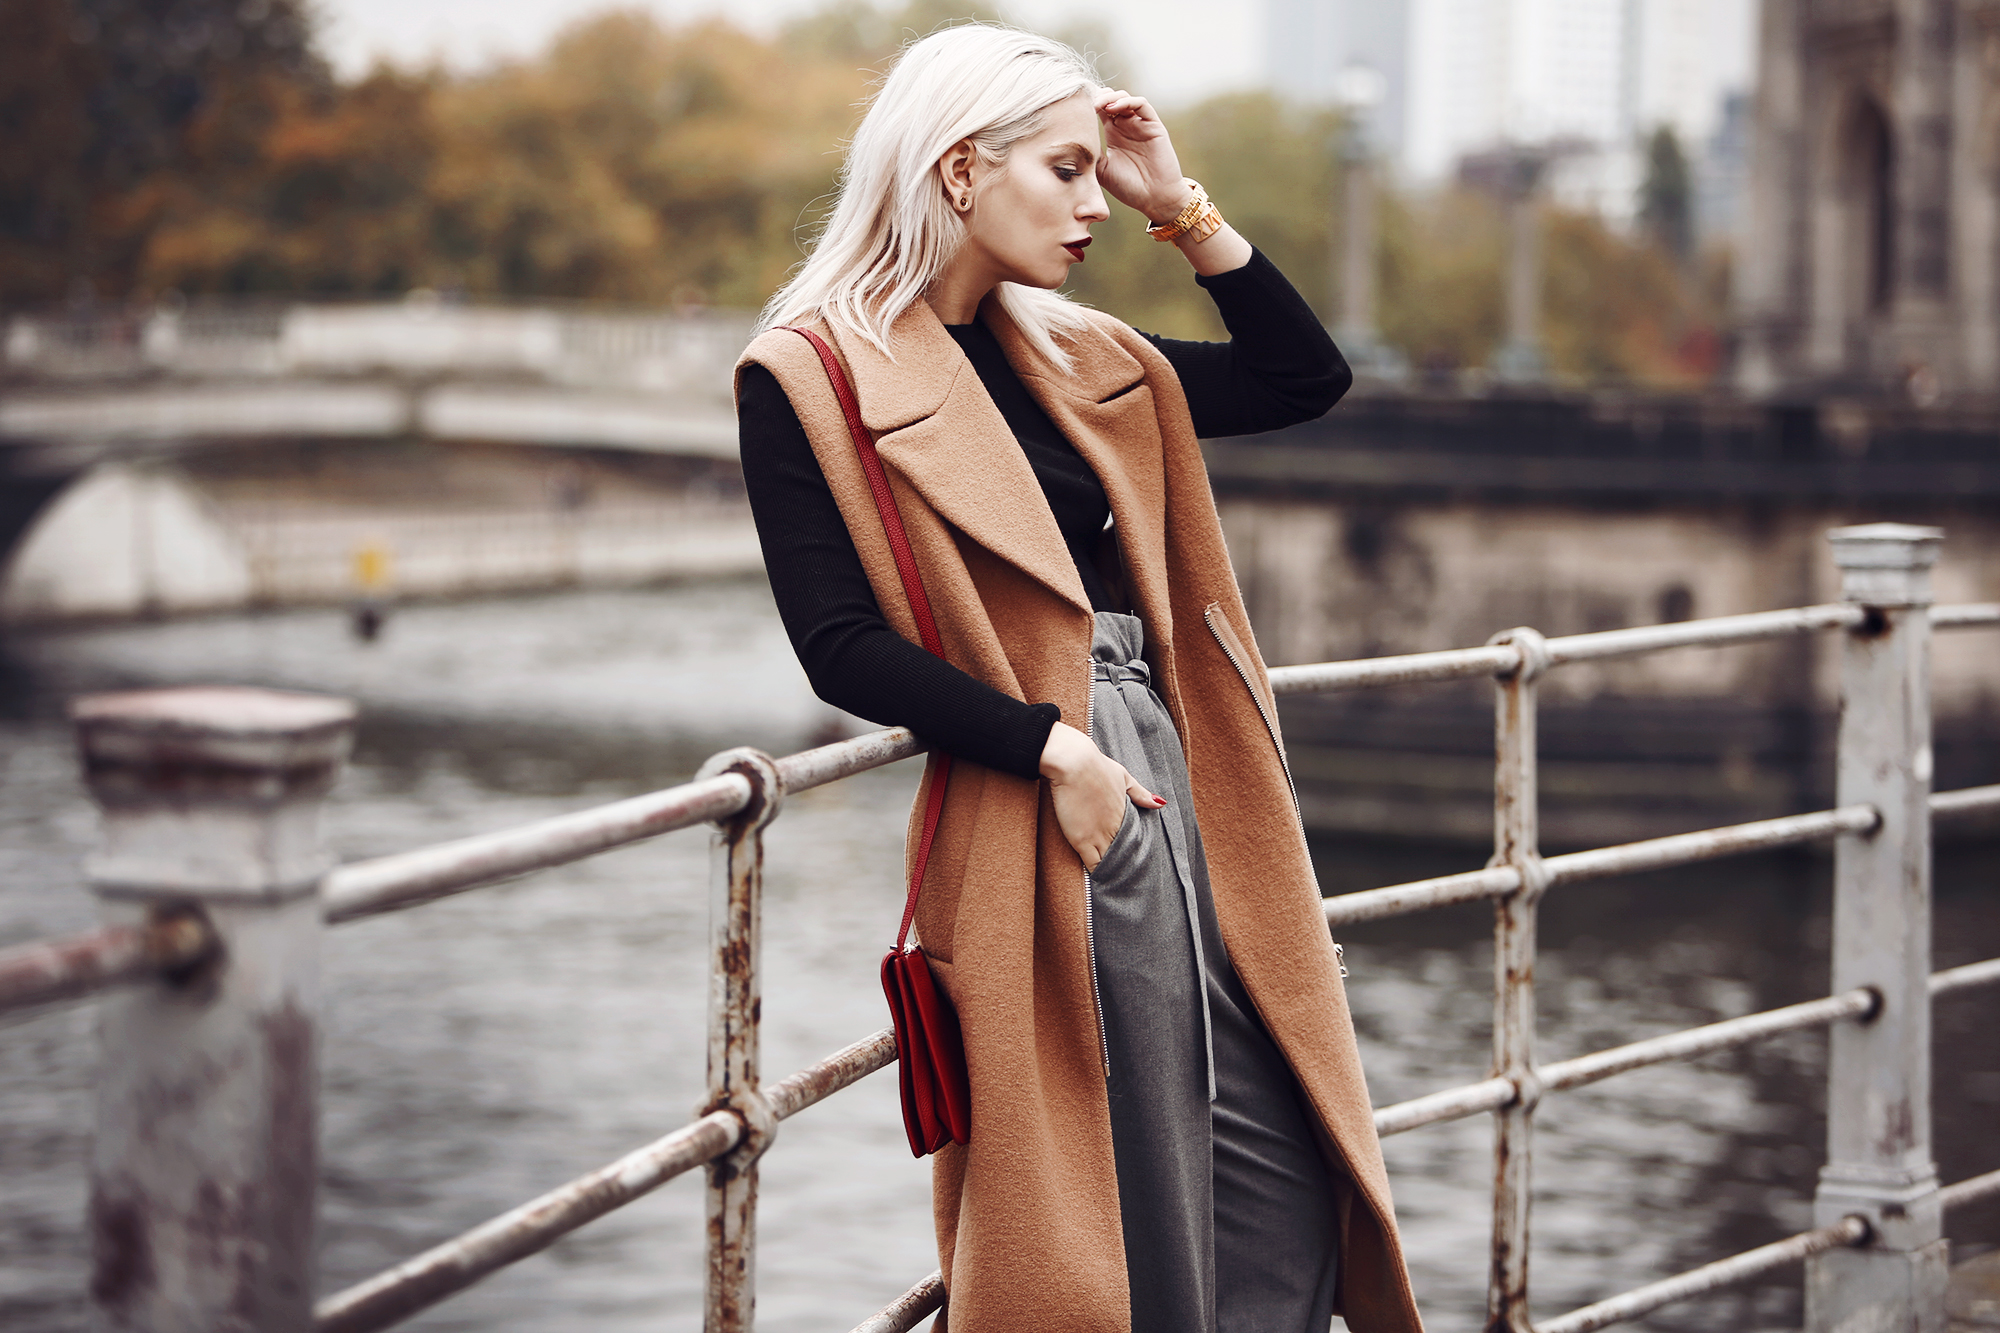 Outfit: Casual Business via Masha Sedgwick | wearing a classy red bag from Aigner, wide grey marlene trousers from Carin Wester, black crop top, a brown wool vest | street style from Berlin | effortless chic